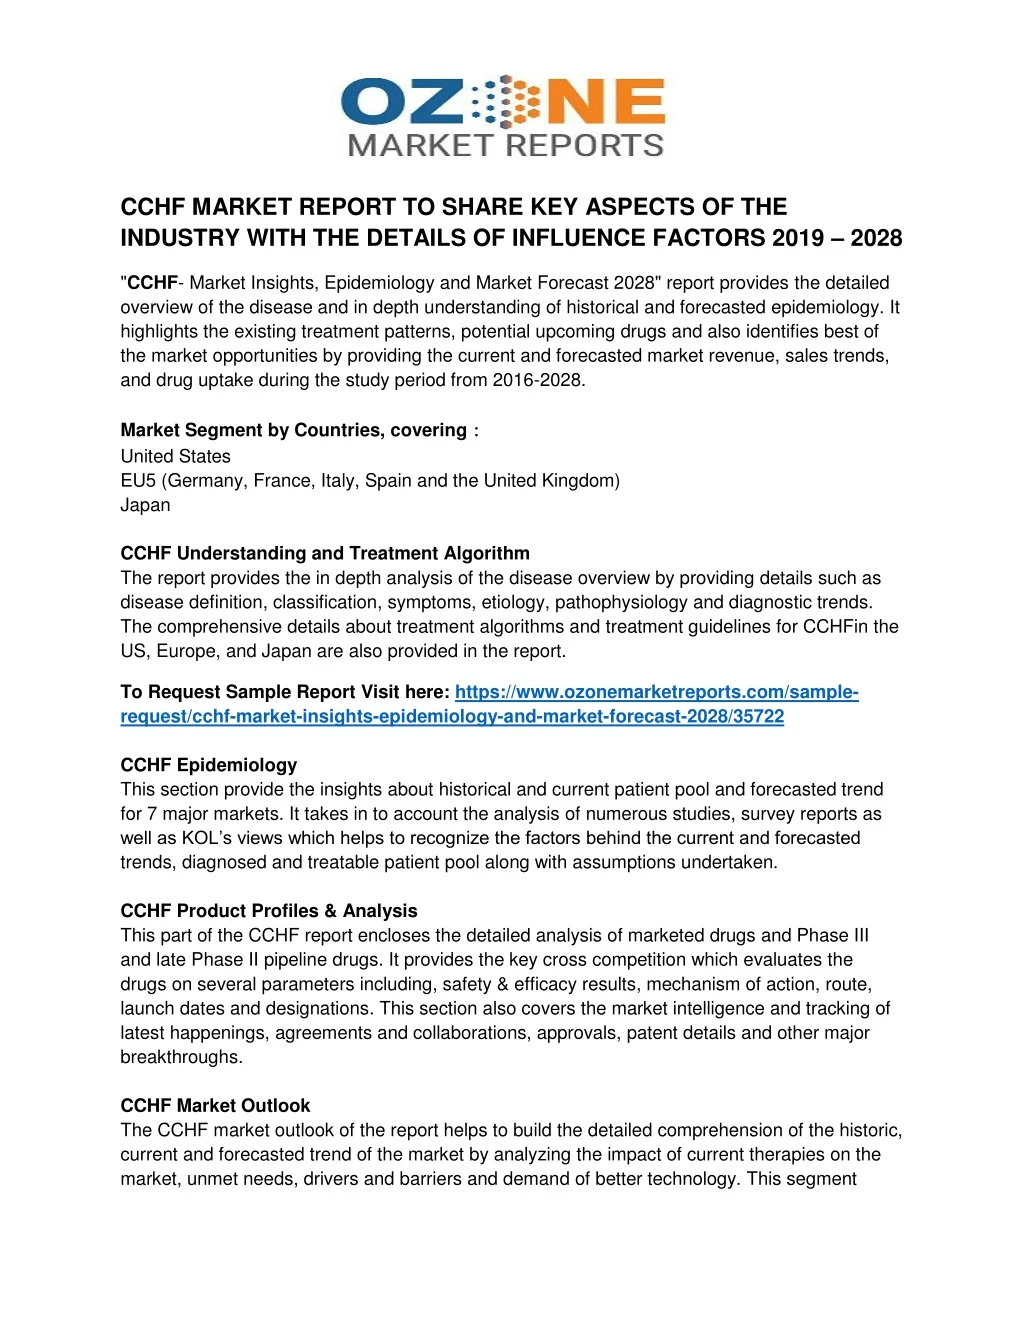 cchf market report to share key aspects